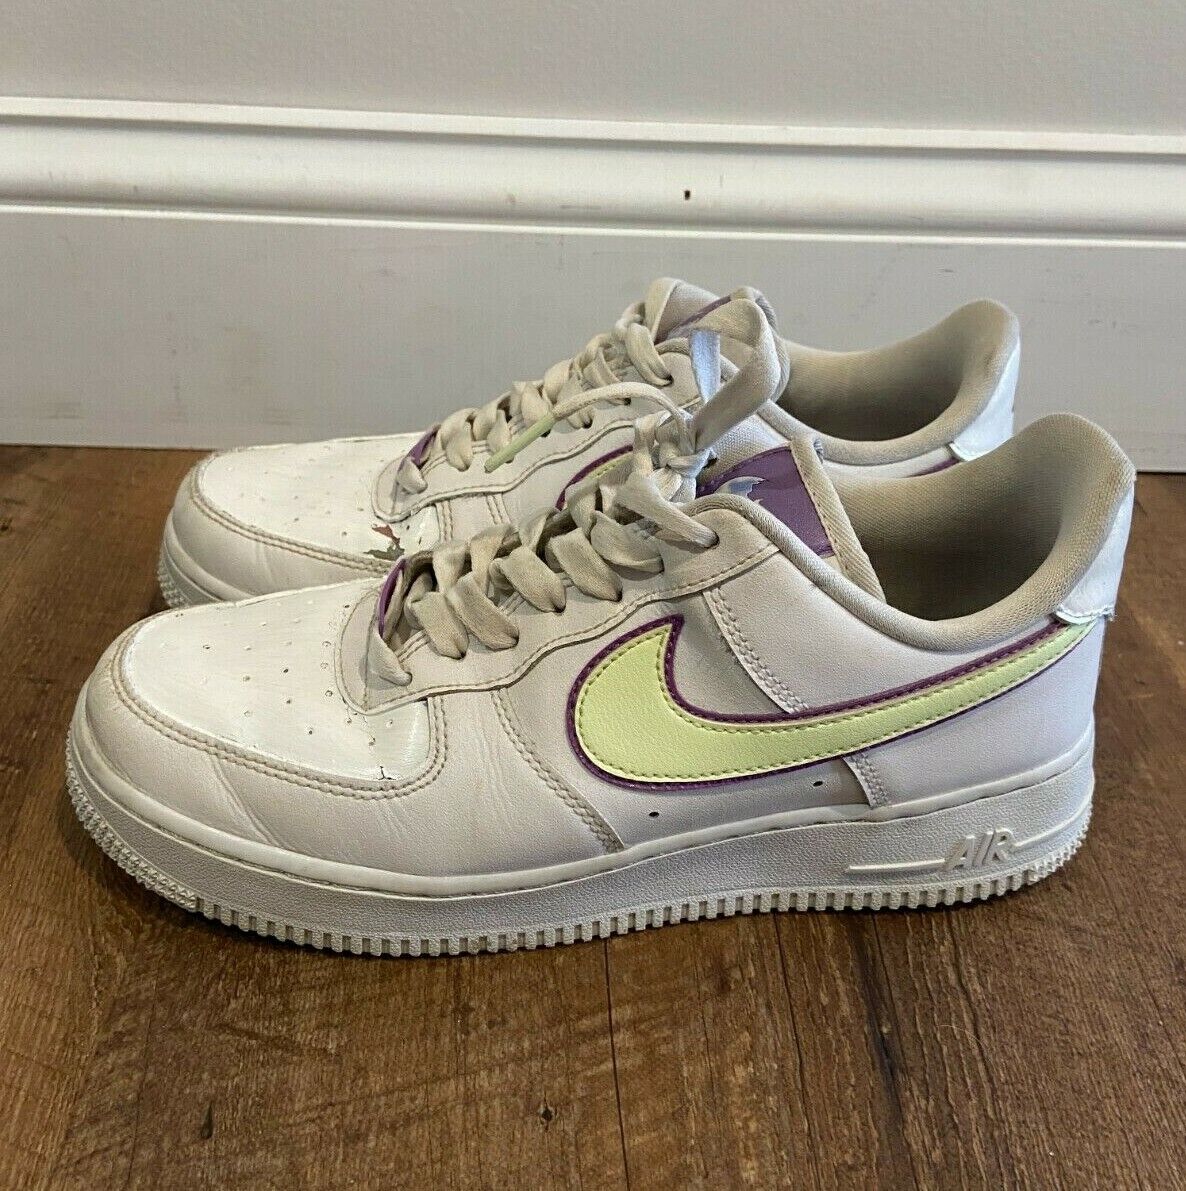 Womens Nike Air Force mart 1 Low 2020 Casual Size Max 41% OFF Sneakers Easter 8